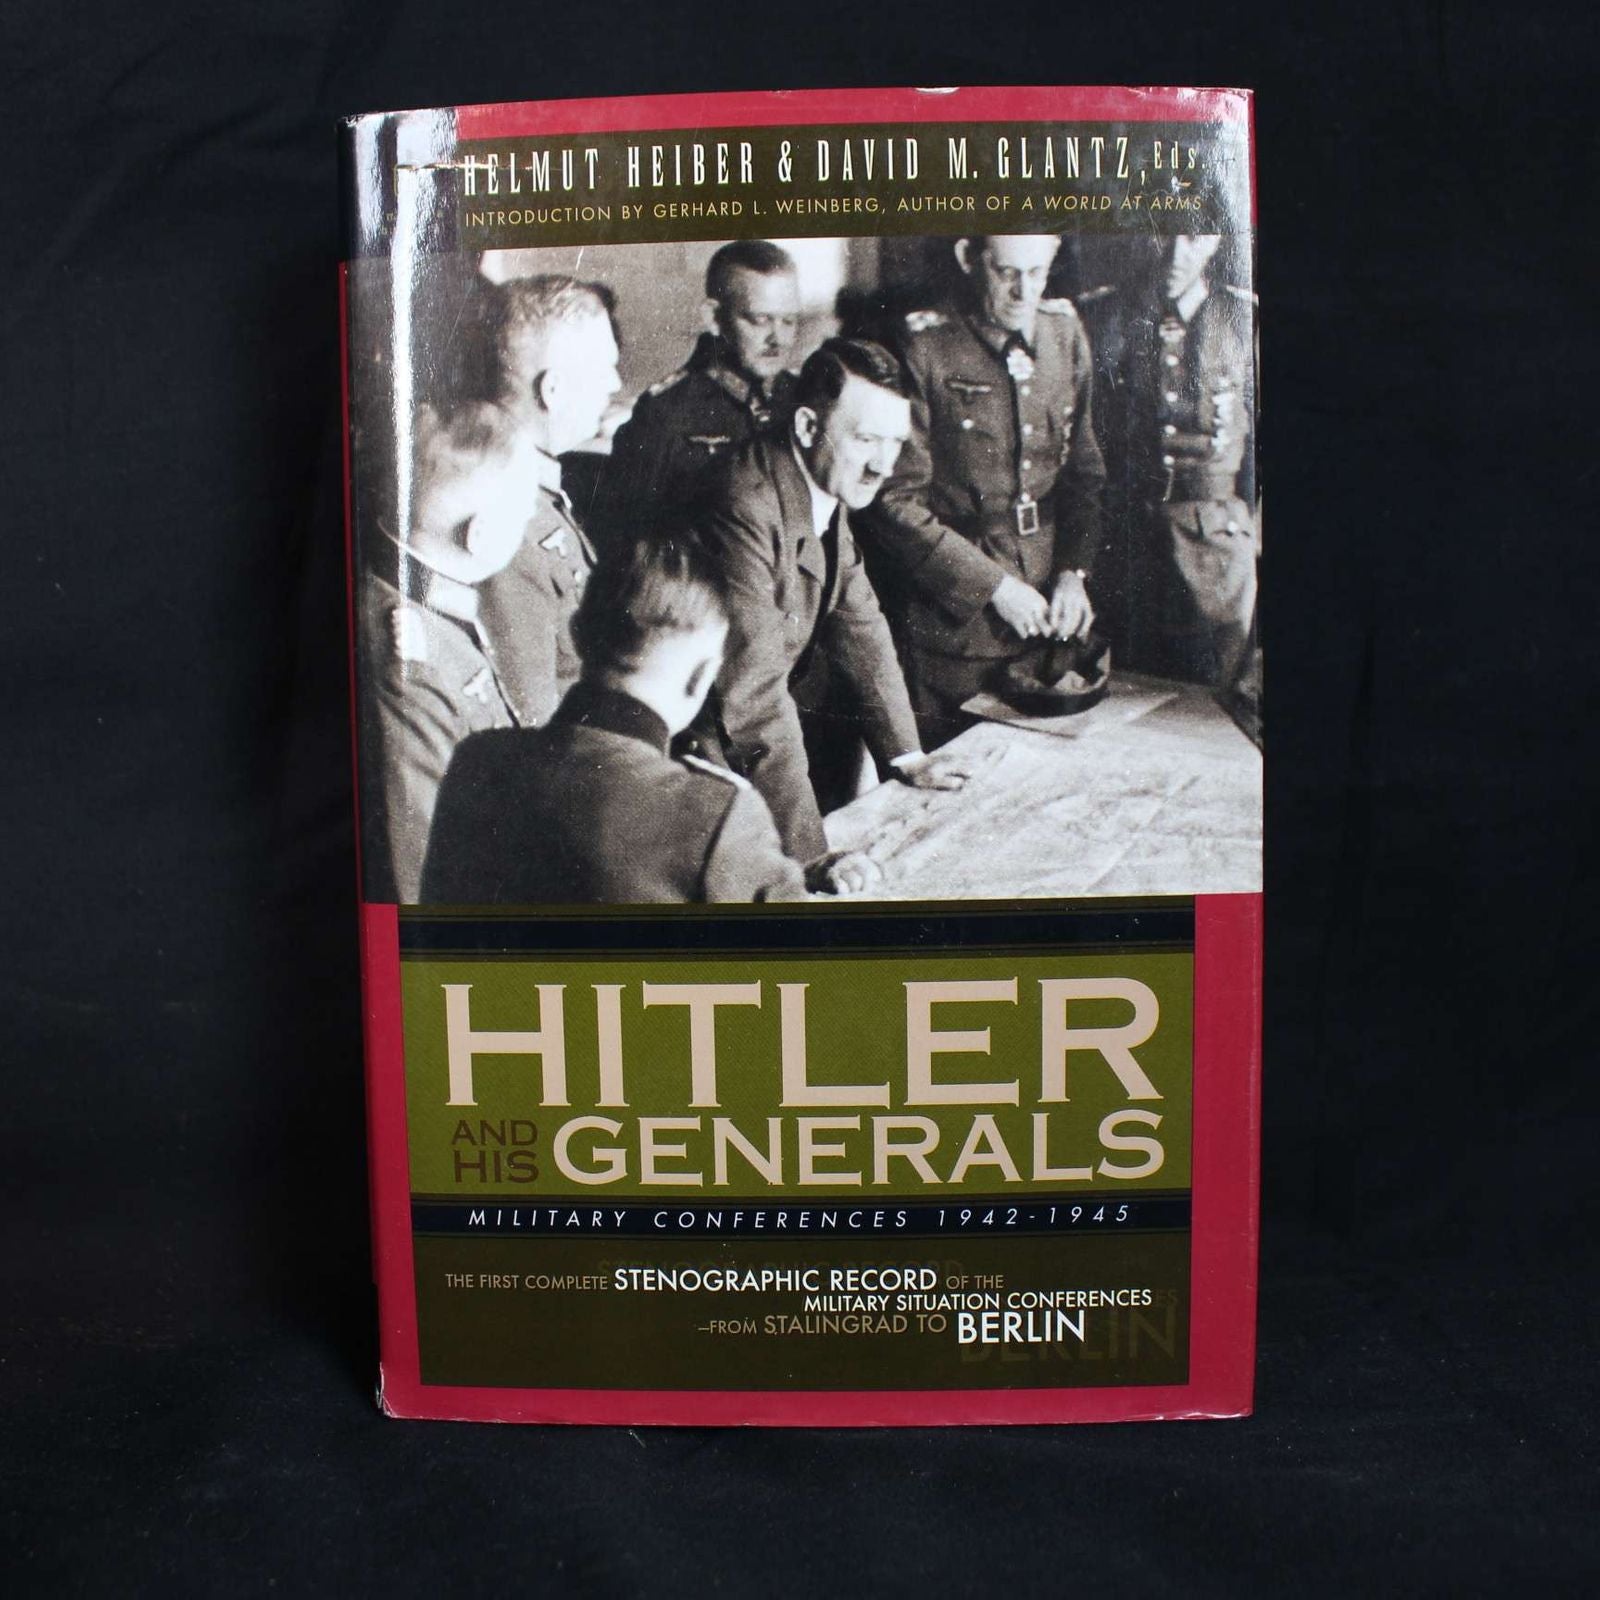 Hardcover Hitler and His Generals: Military Conferences 1942-1945 by David M. Glantz (editor), Helmut Heiber (editor), Gerhard L. Weinberg (introduction), 2003